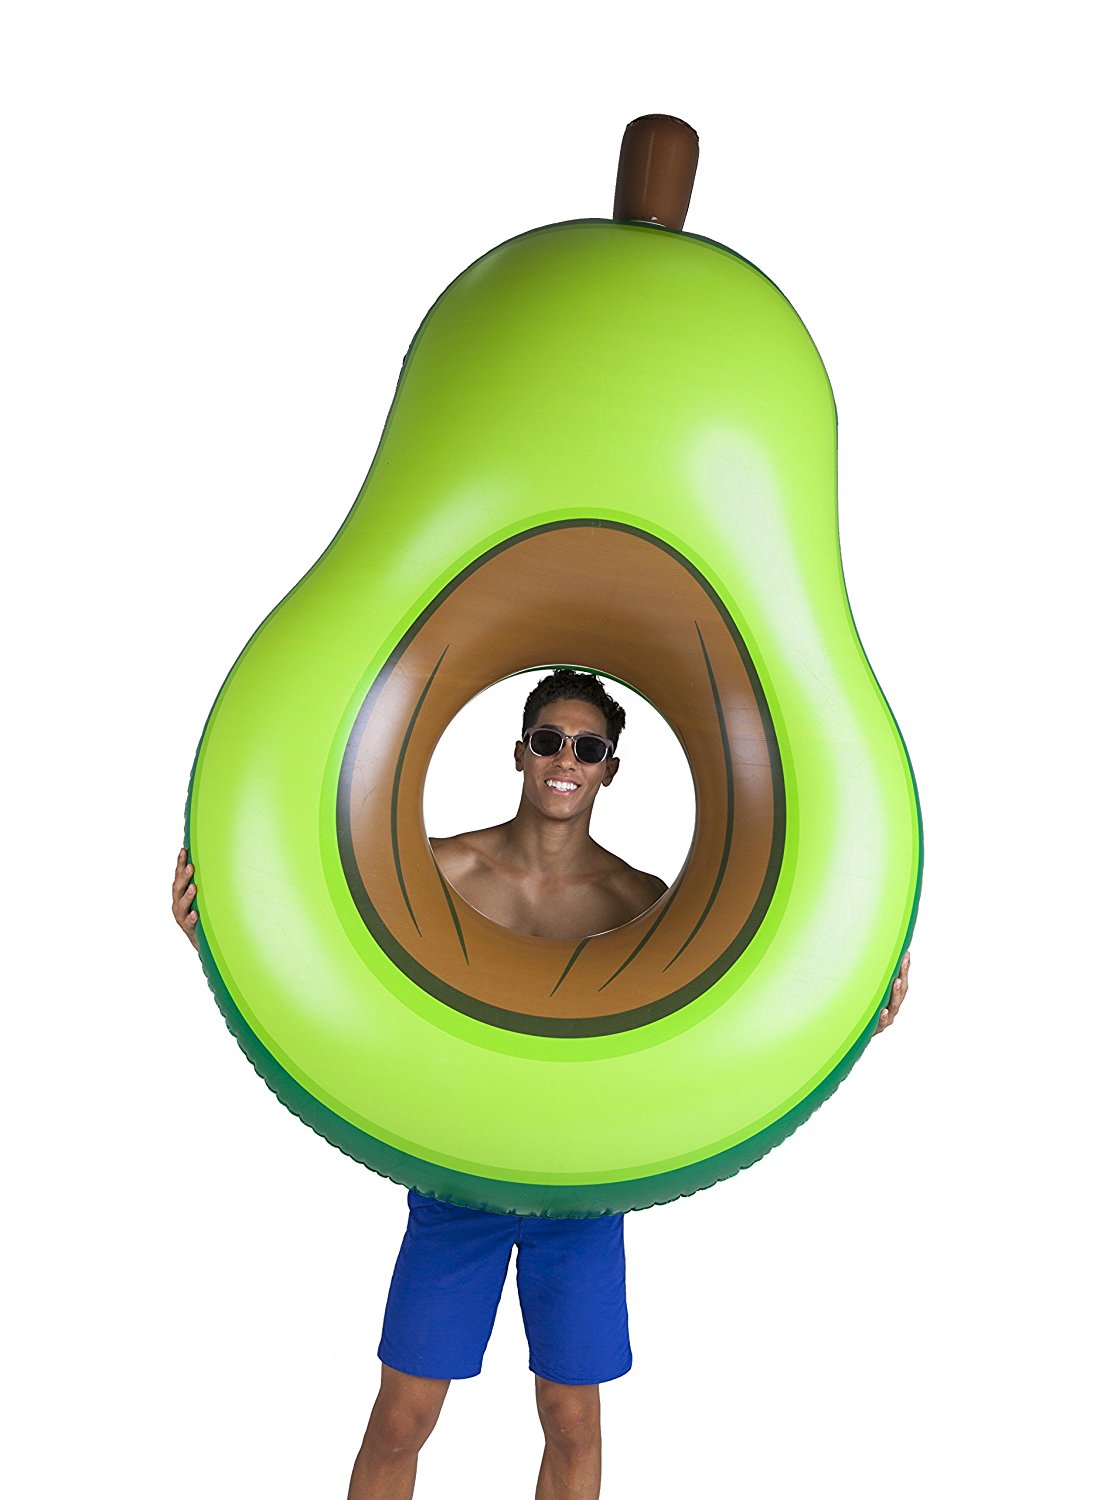 Guac Lovers Will Definitely Want This Giant Avocado Pool Float